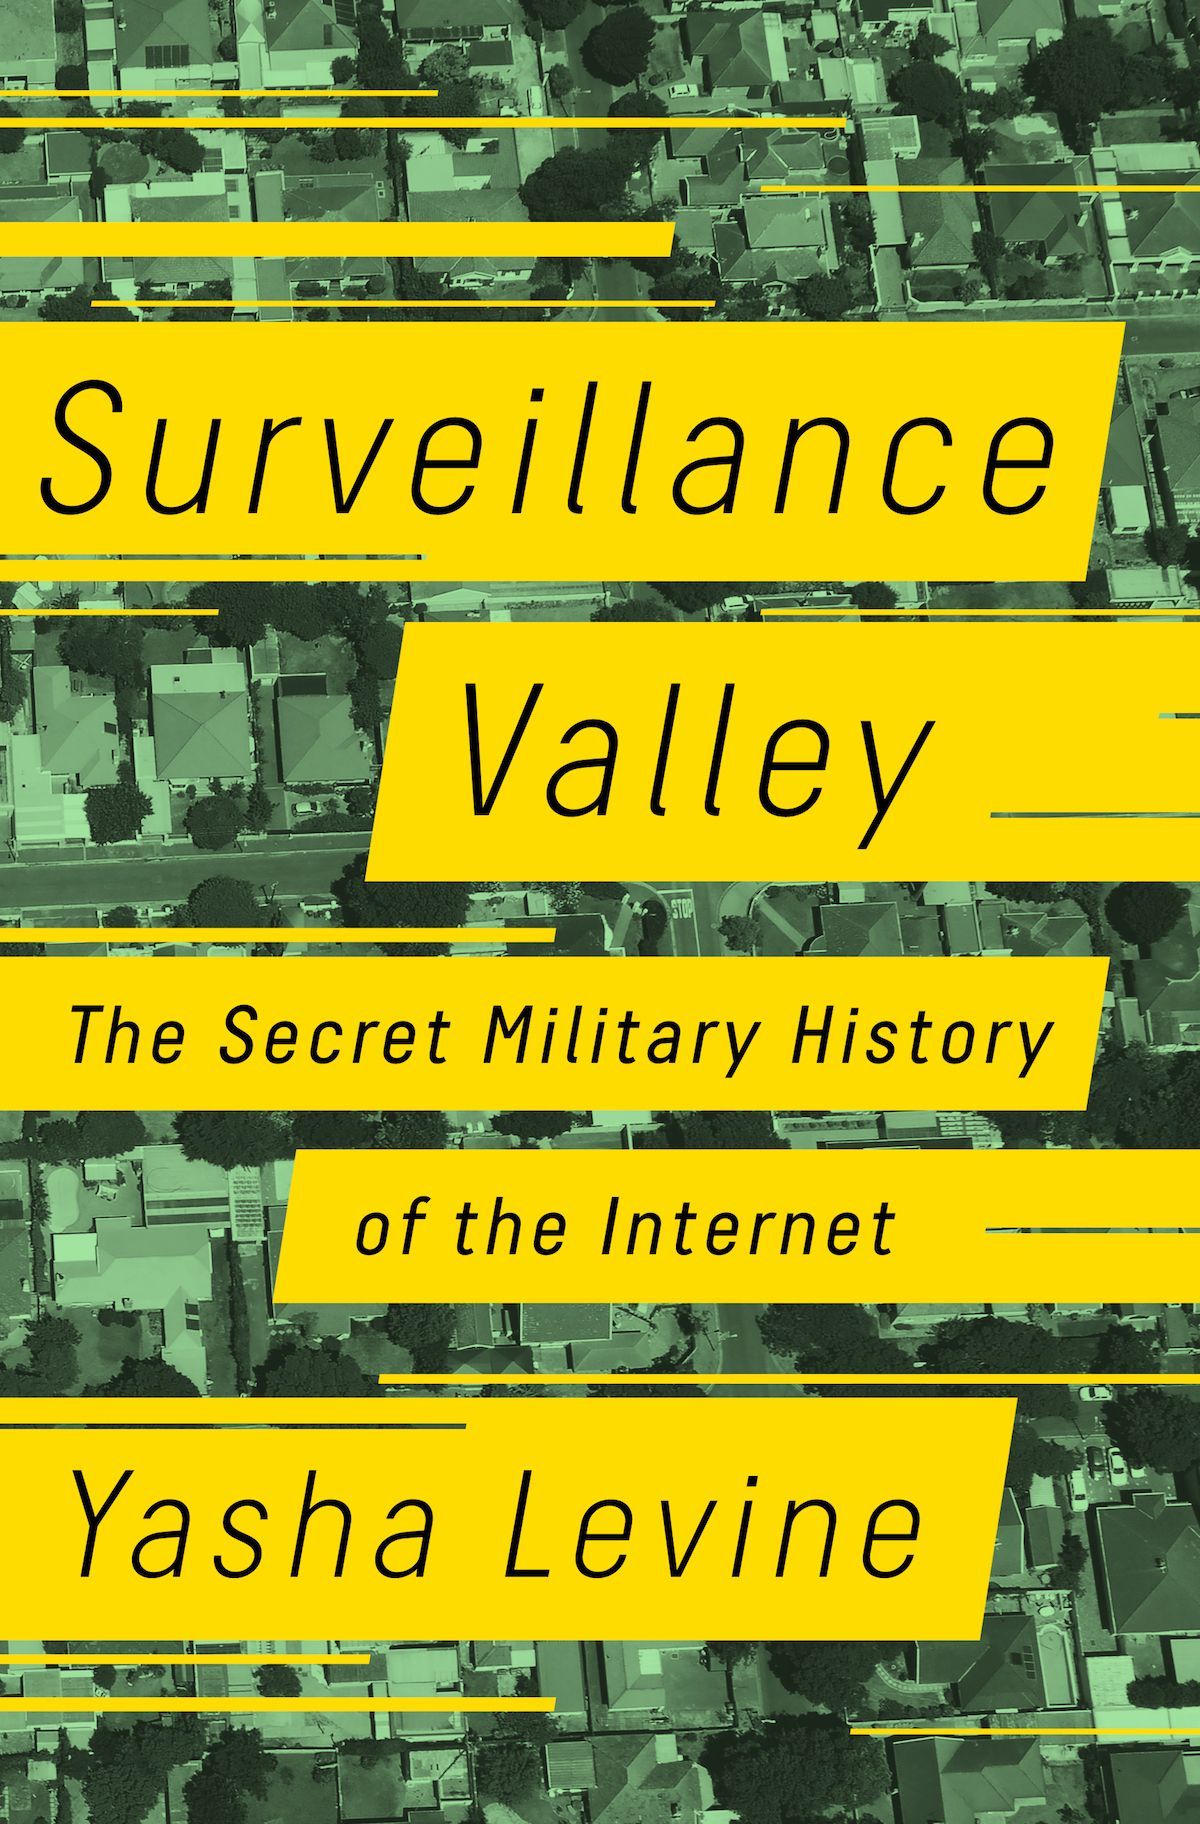 The Long View: Surveillance, the Internet, and Government Research